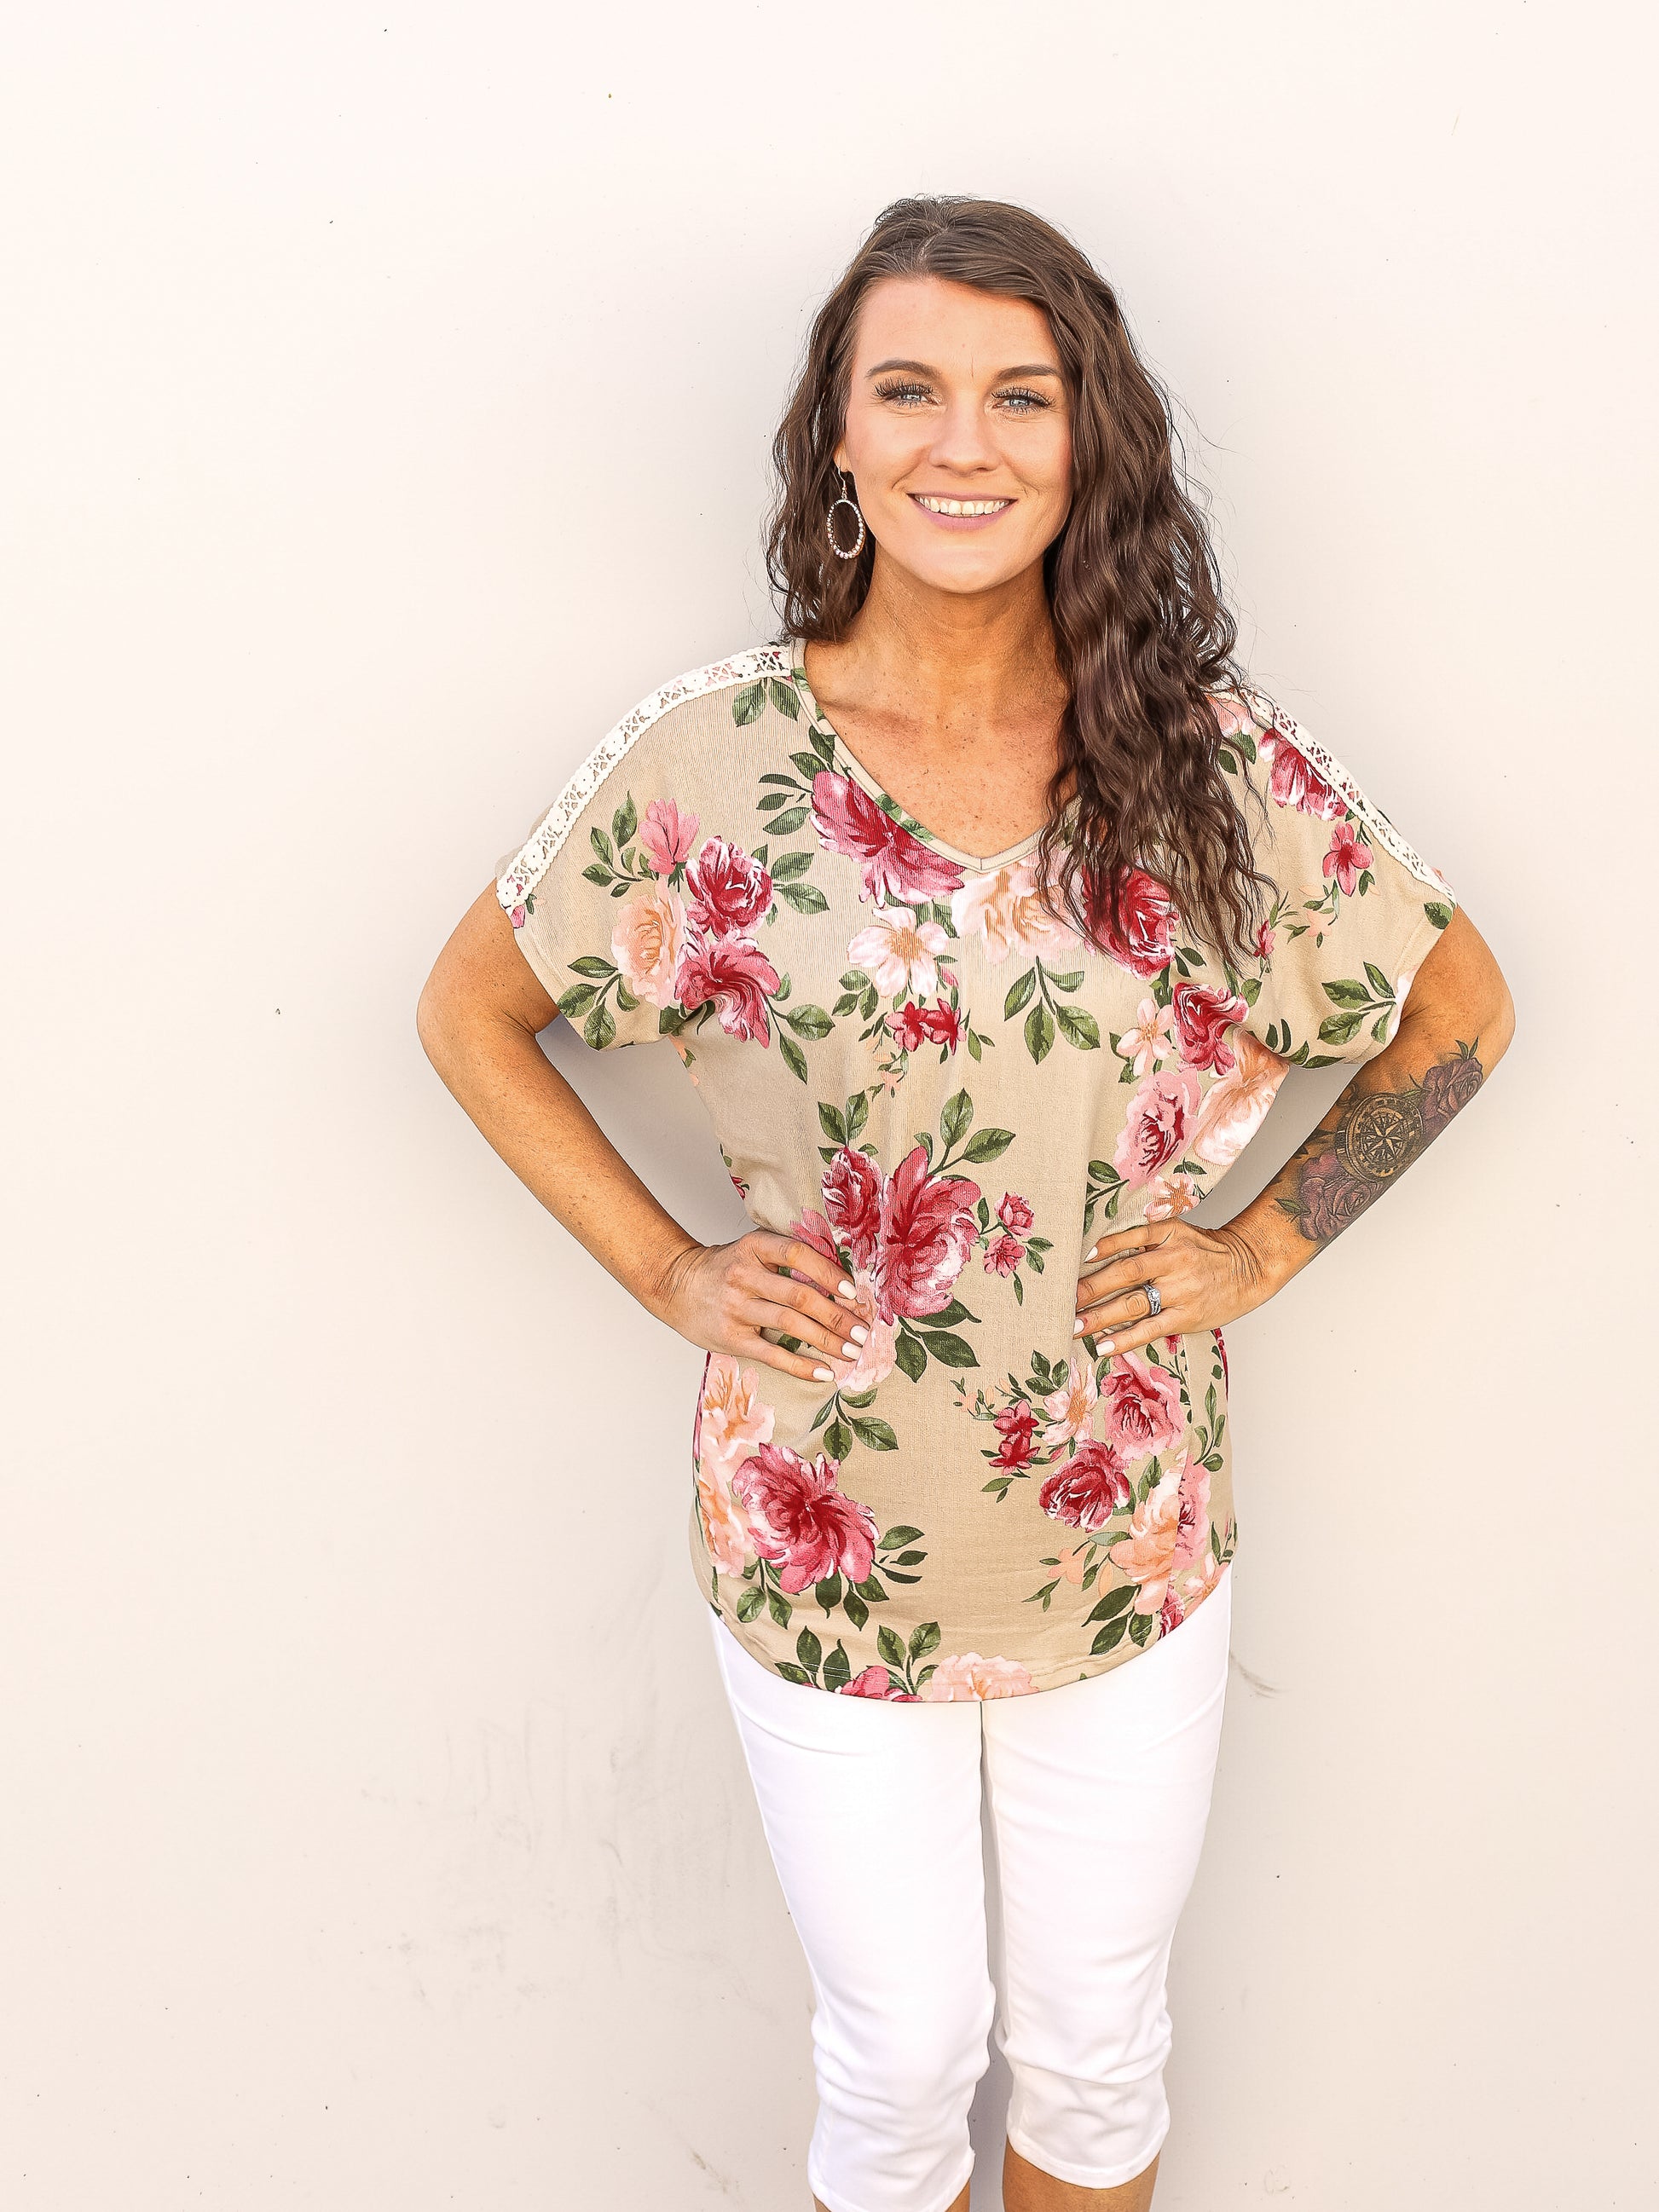 Simple v-neck short sleeve floral top with crochet details down the sleeves